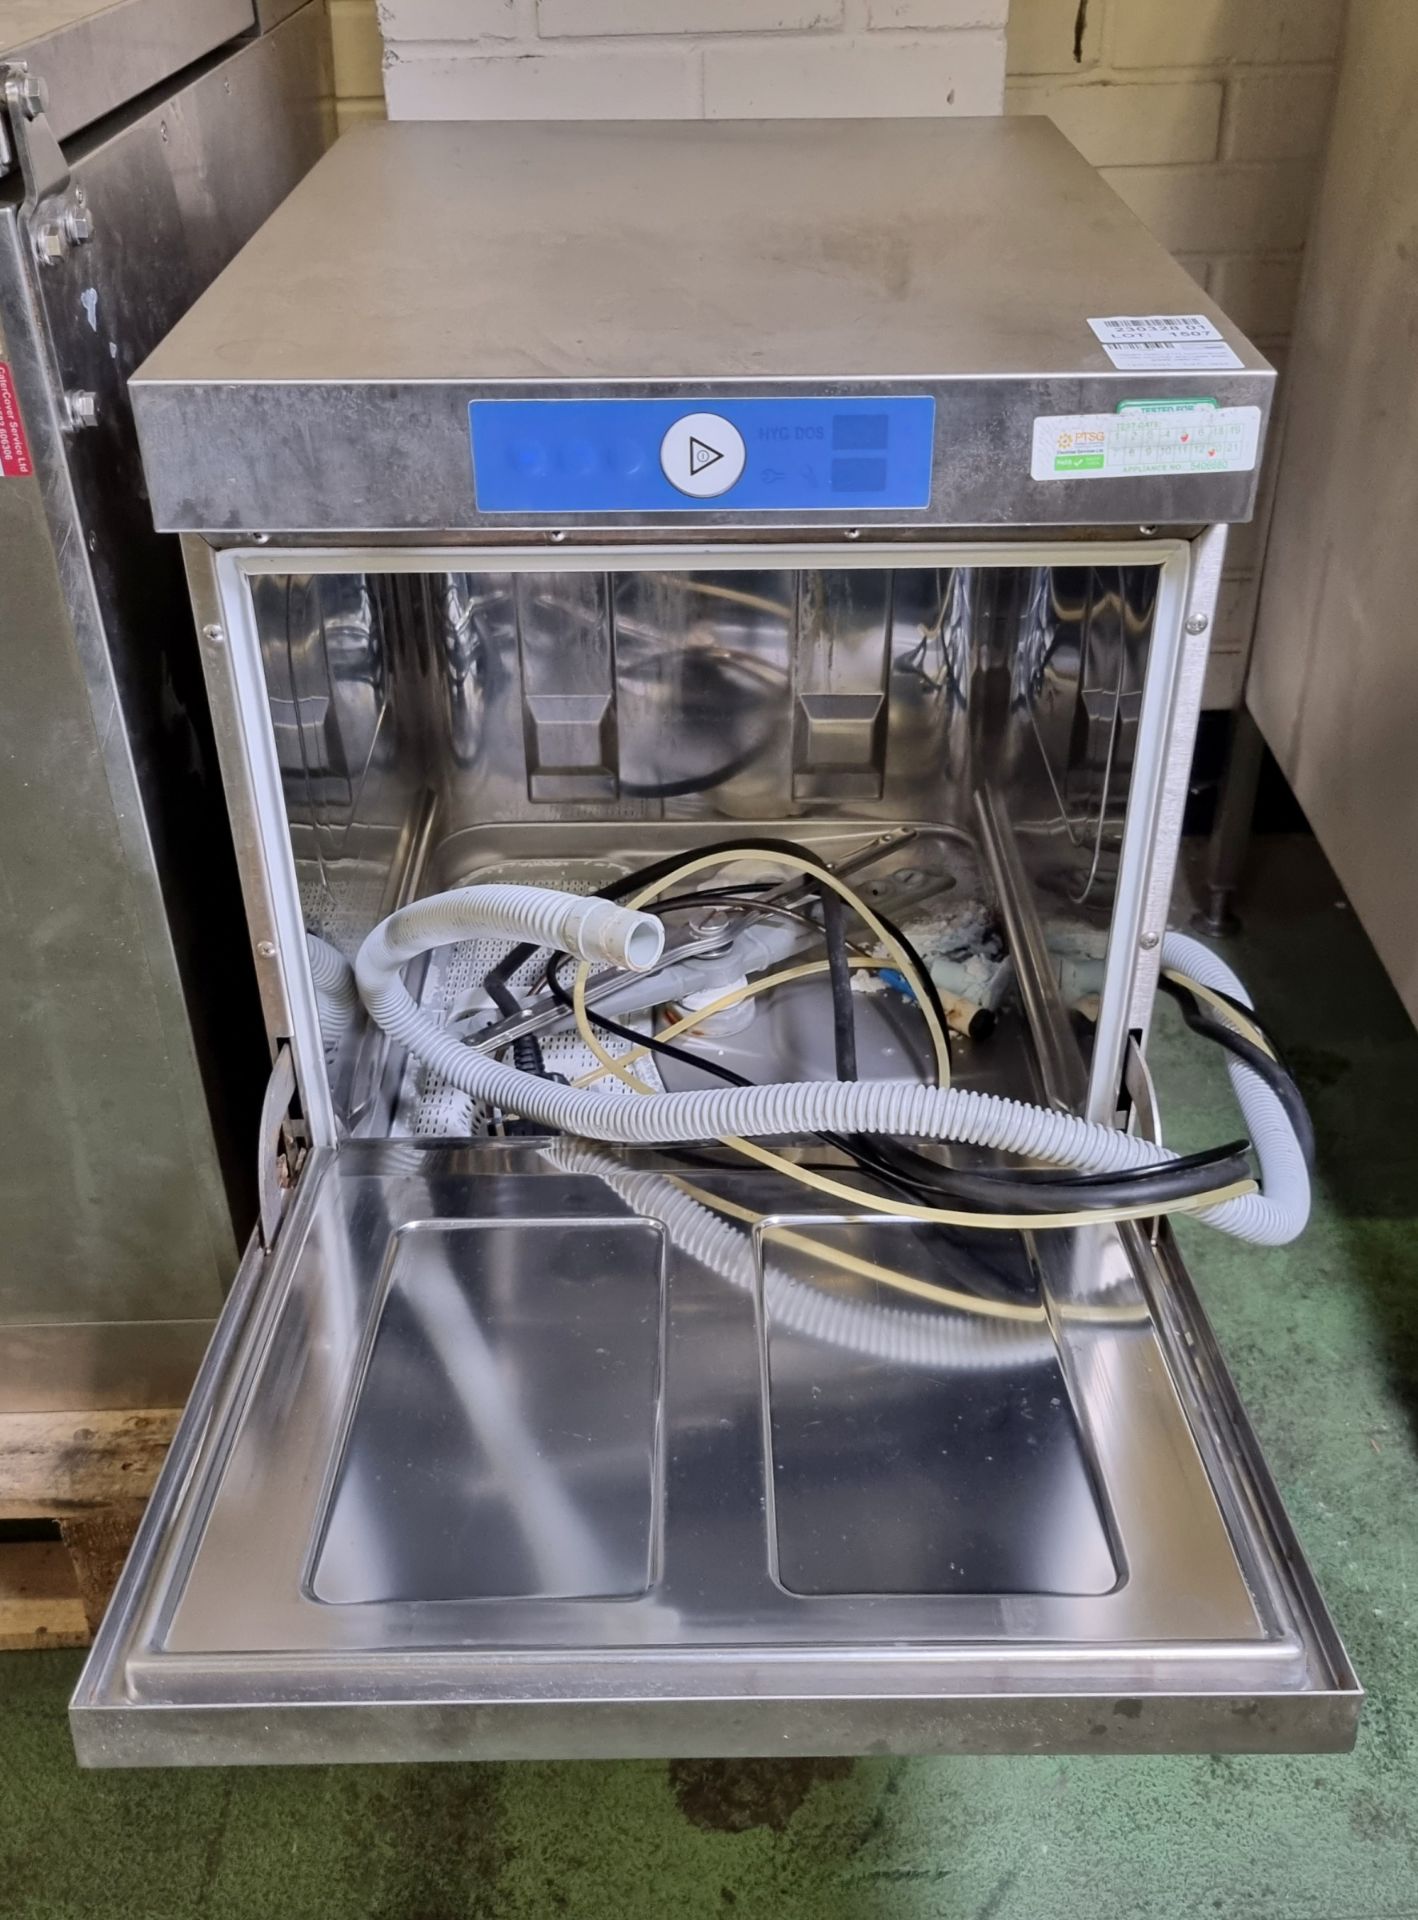 Hobart GSC-21N commercial under-counter stainless steel glass washer - 460mm W - Image 3 of 4